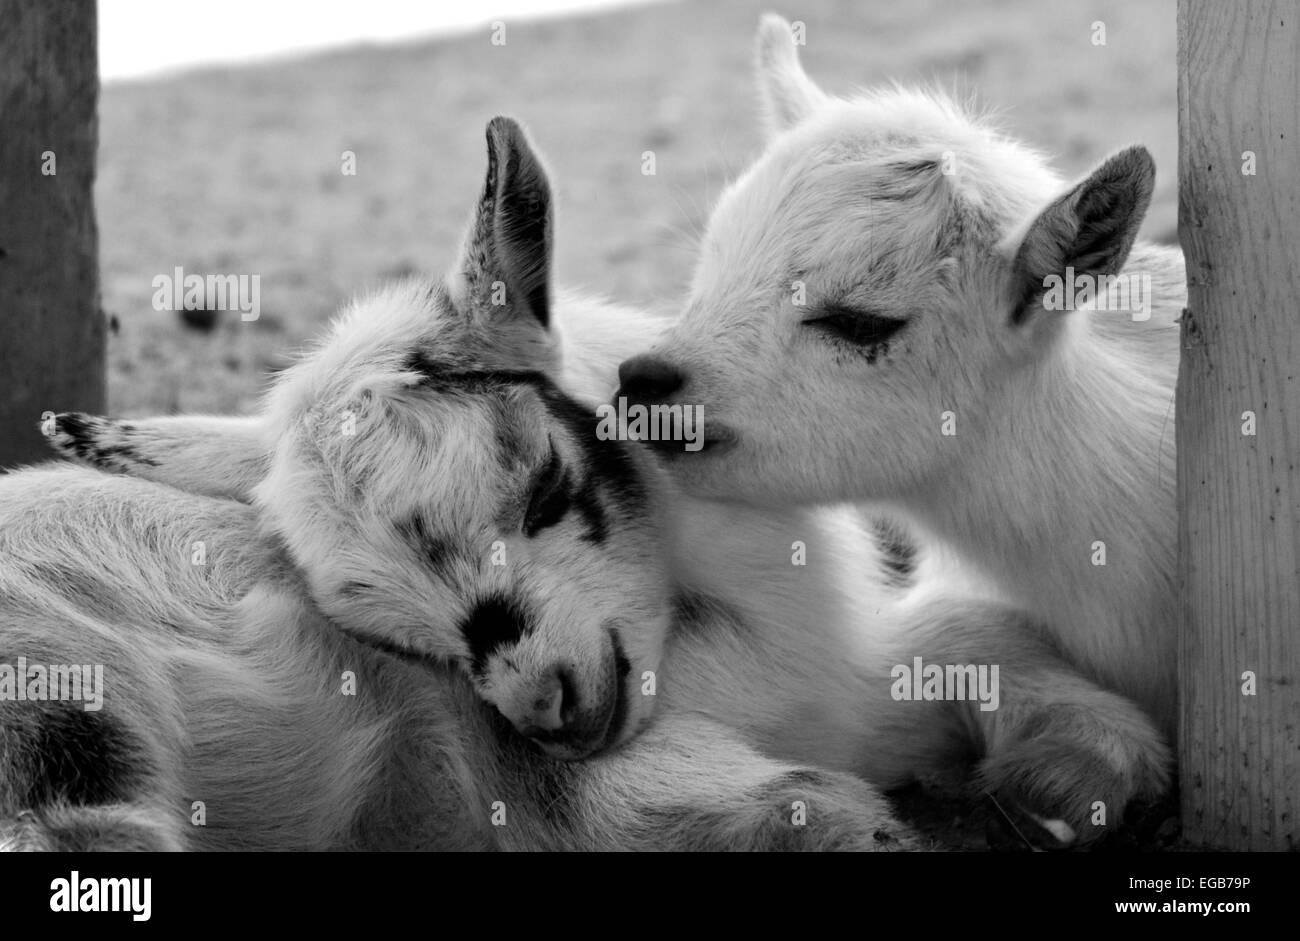 A couple of goat kids relaxing together. Stock Photo